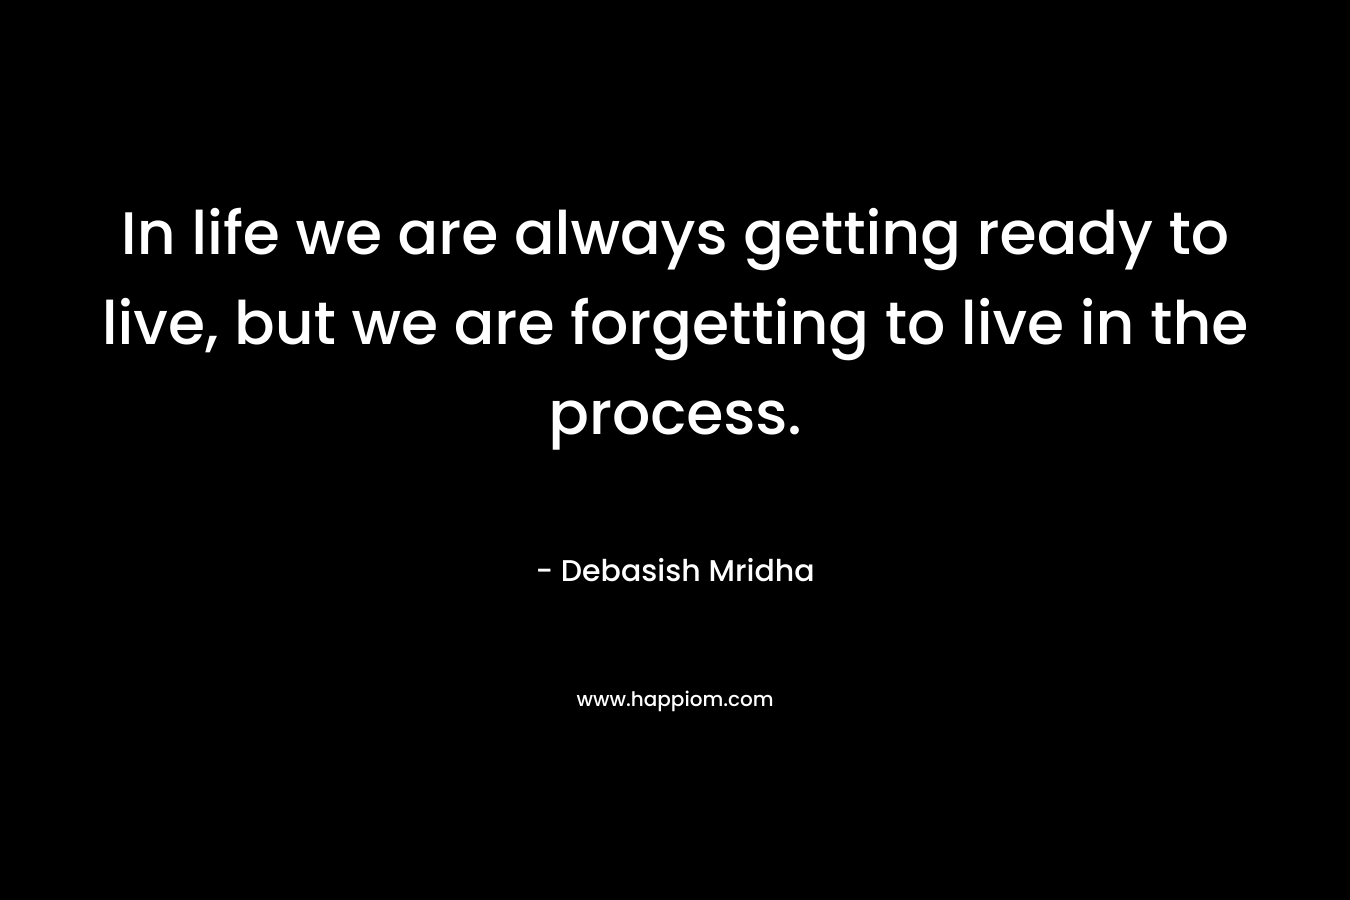 In life we are always getting ready to live, but we are forgetting to live in the process.